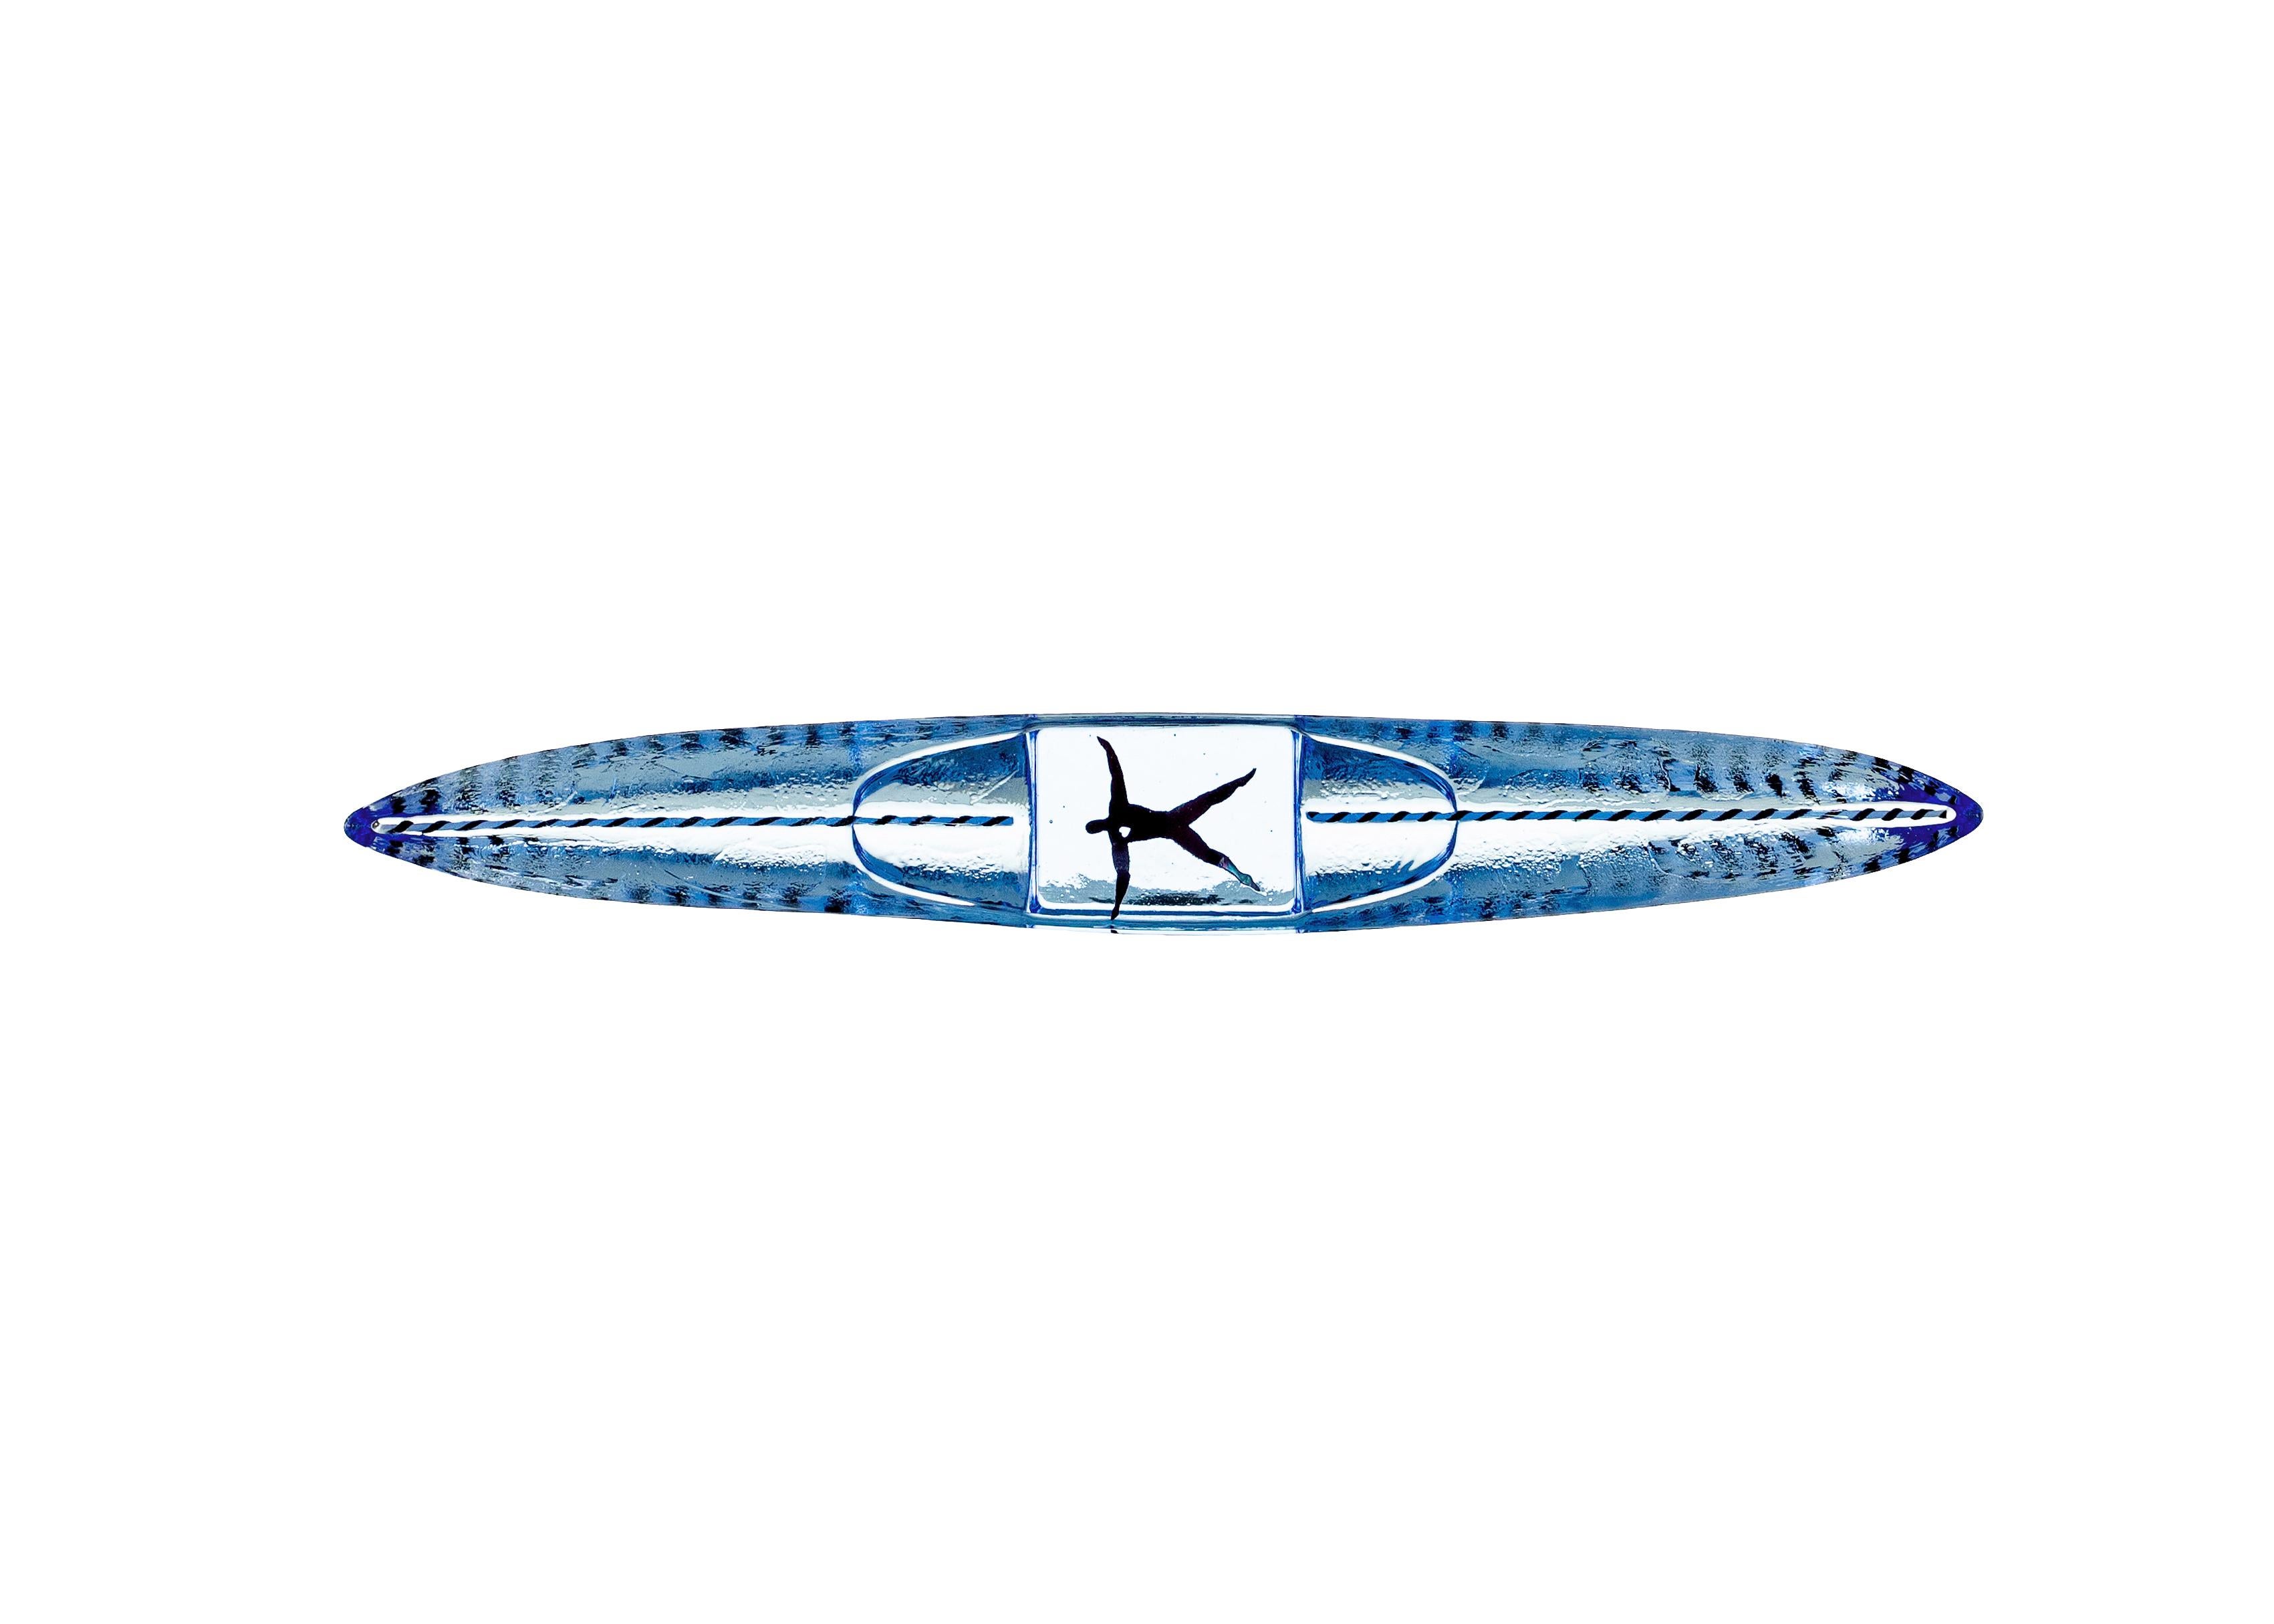 Drifter is a creation by the renowned Swedish glass artist Bertil Vallien who sees the boat as a symbol of freedom and solitude. The boat has become one of his main signatures, recreated in different sizes and forms. Drifter is handmade at Kosta